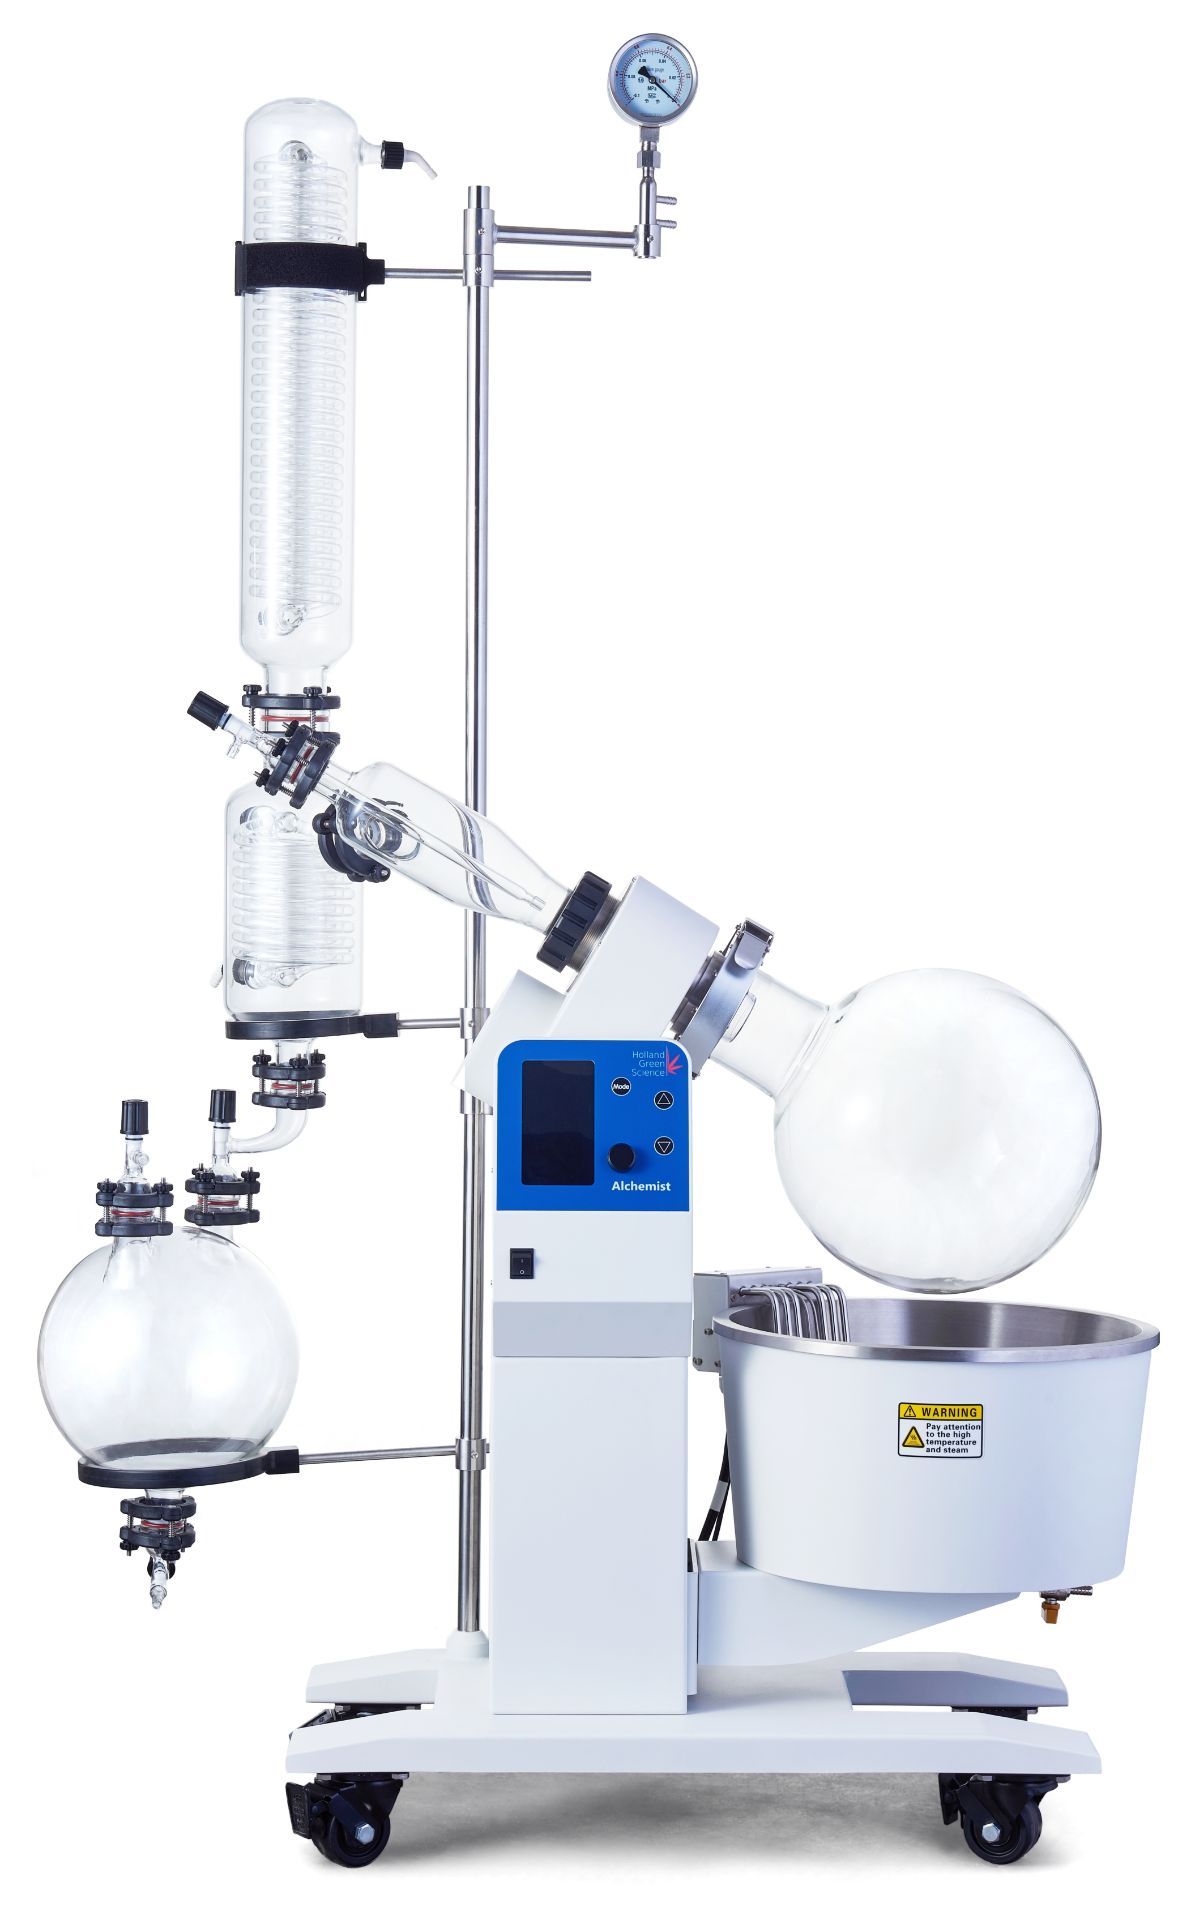 Lot of (4) New/ Original Packaging Holland Green Science 20L Rotary Evaporator Model Alchemist - Image 2 of 2